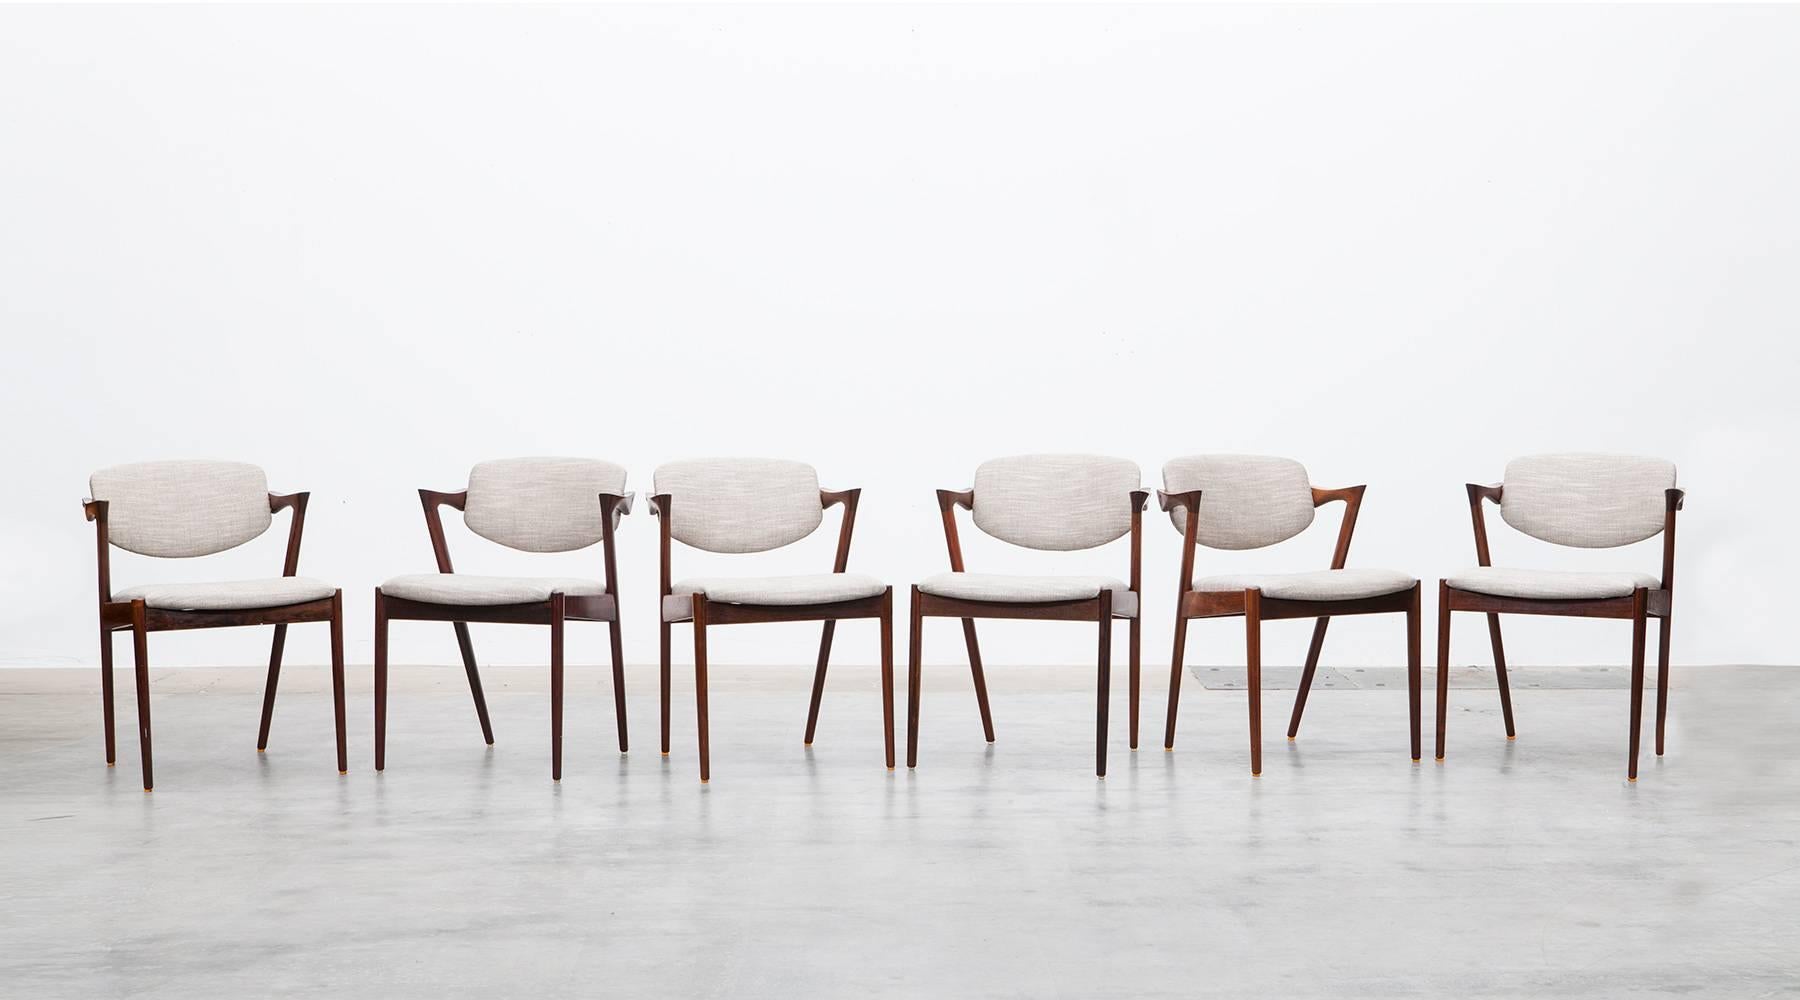 Wonderful Mid-Century Kai Kristiansen dining chairs in wood comes in a set of eight. The wooden backrest is beautifully curved with small arm details. The conditions are very good, the seats newly upholstered with high-quality fabric. Manufactured